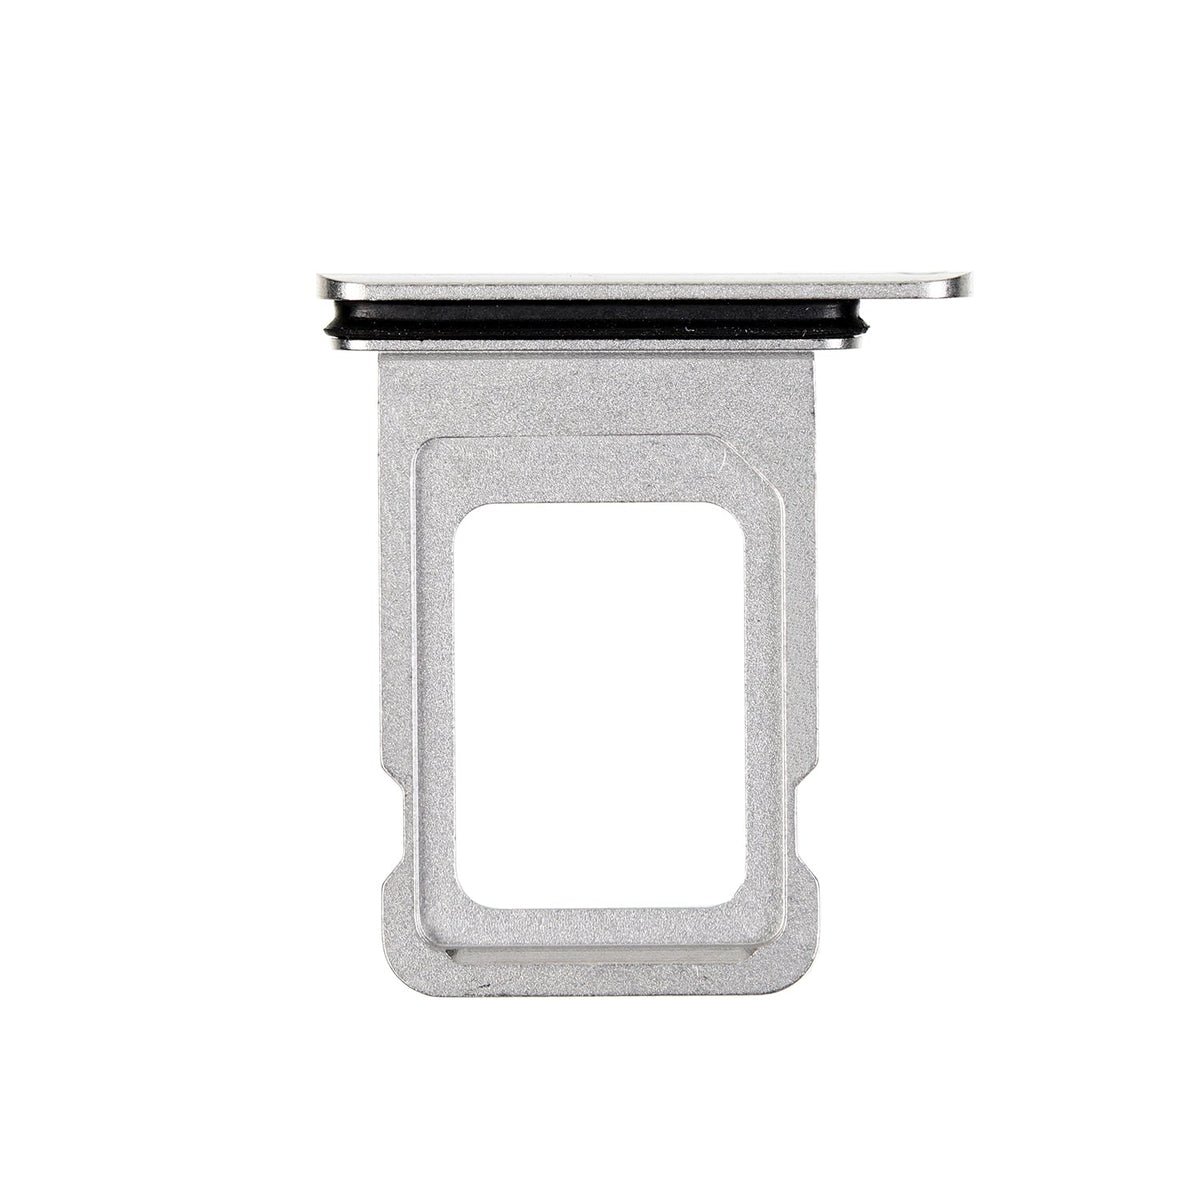 SINGLE SIM CARD TRAY - SILVER FOR IPHONE 11 PRO/11 PRO MAX